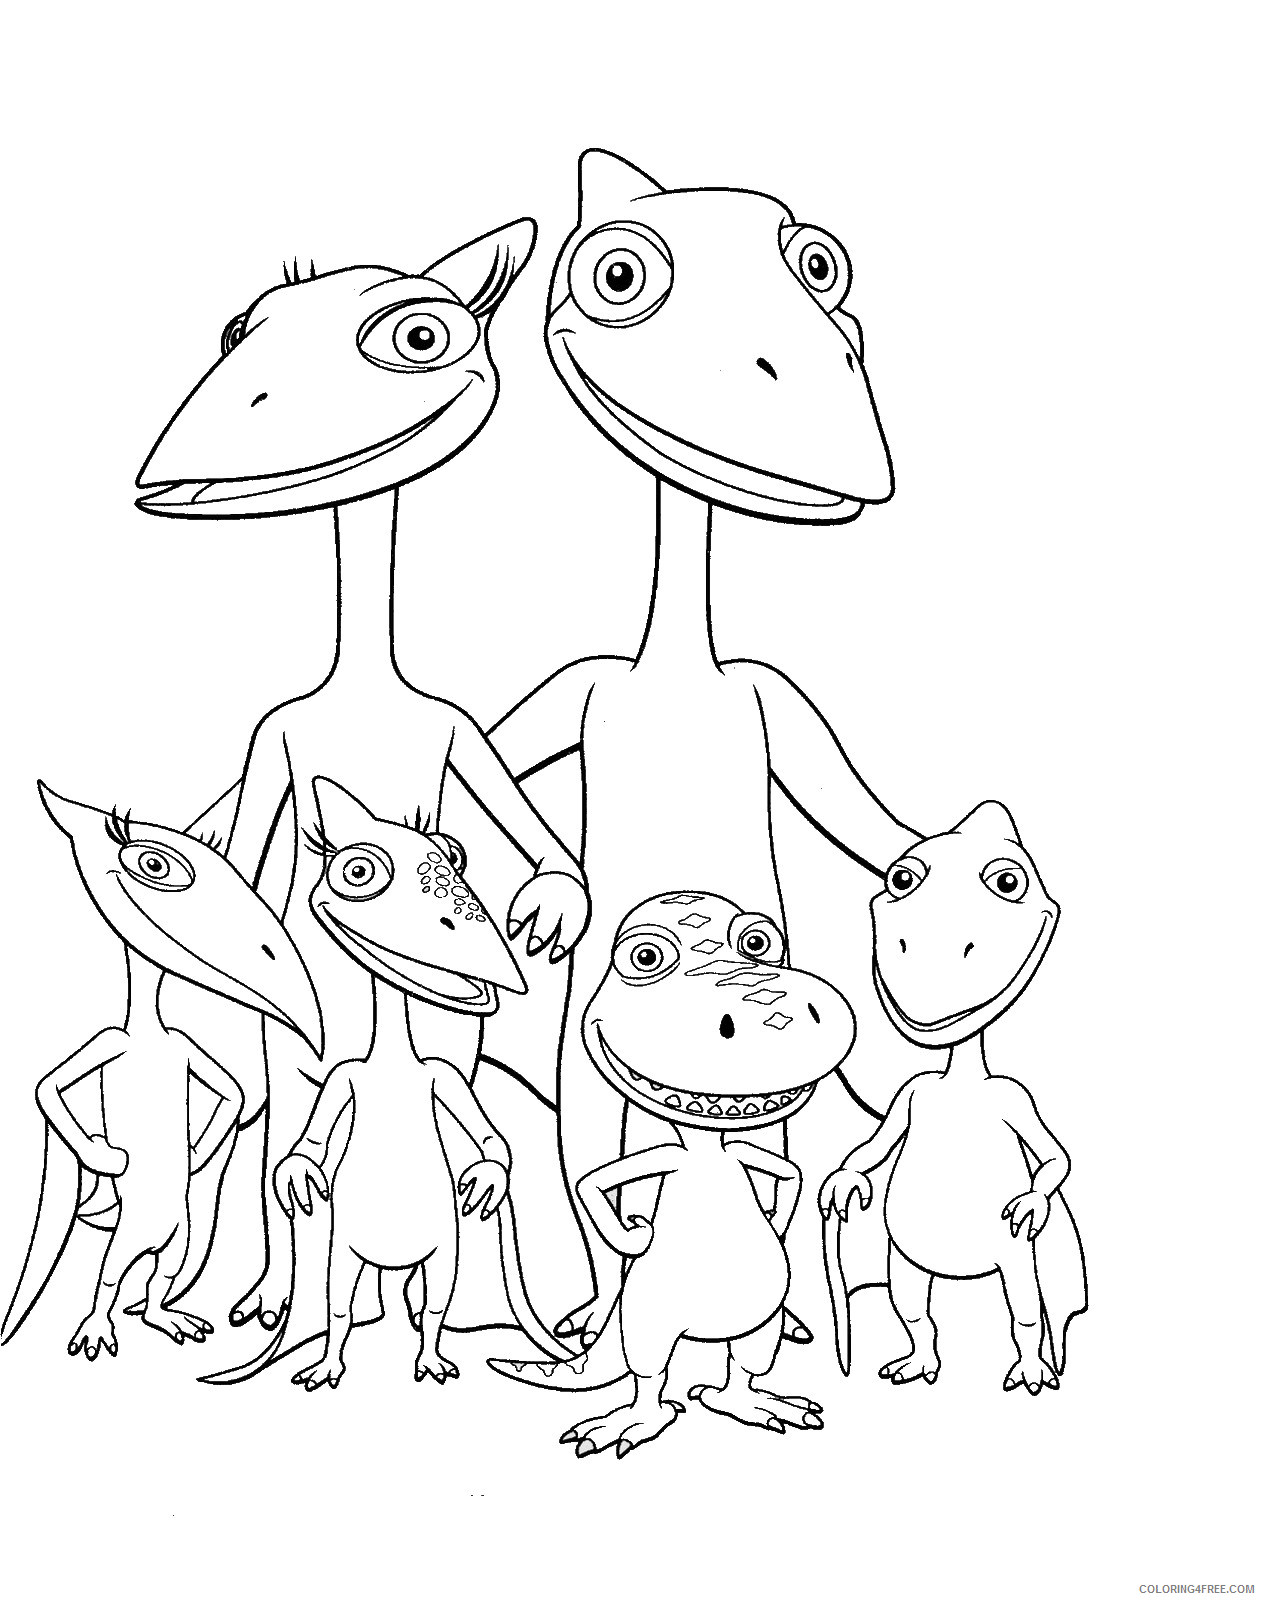 Dinosaur Train Coloring Pages Cartoons dino_train_cl_04 Printable 2020 2225 Coloring4free